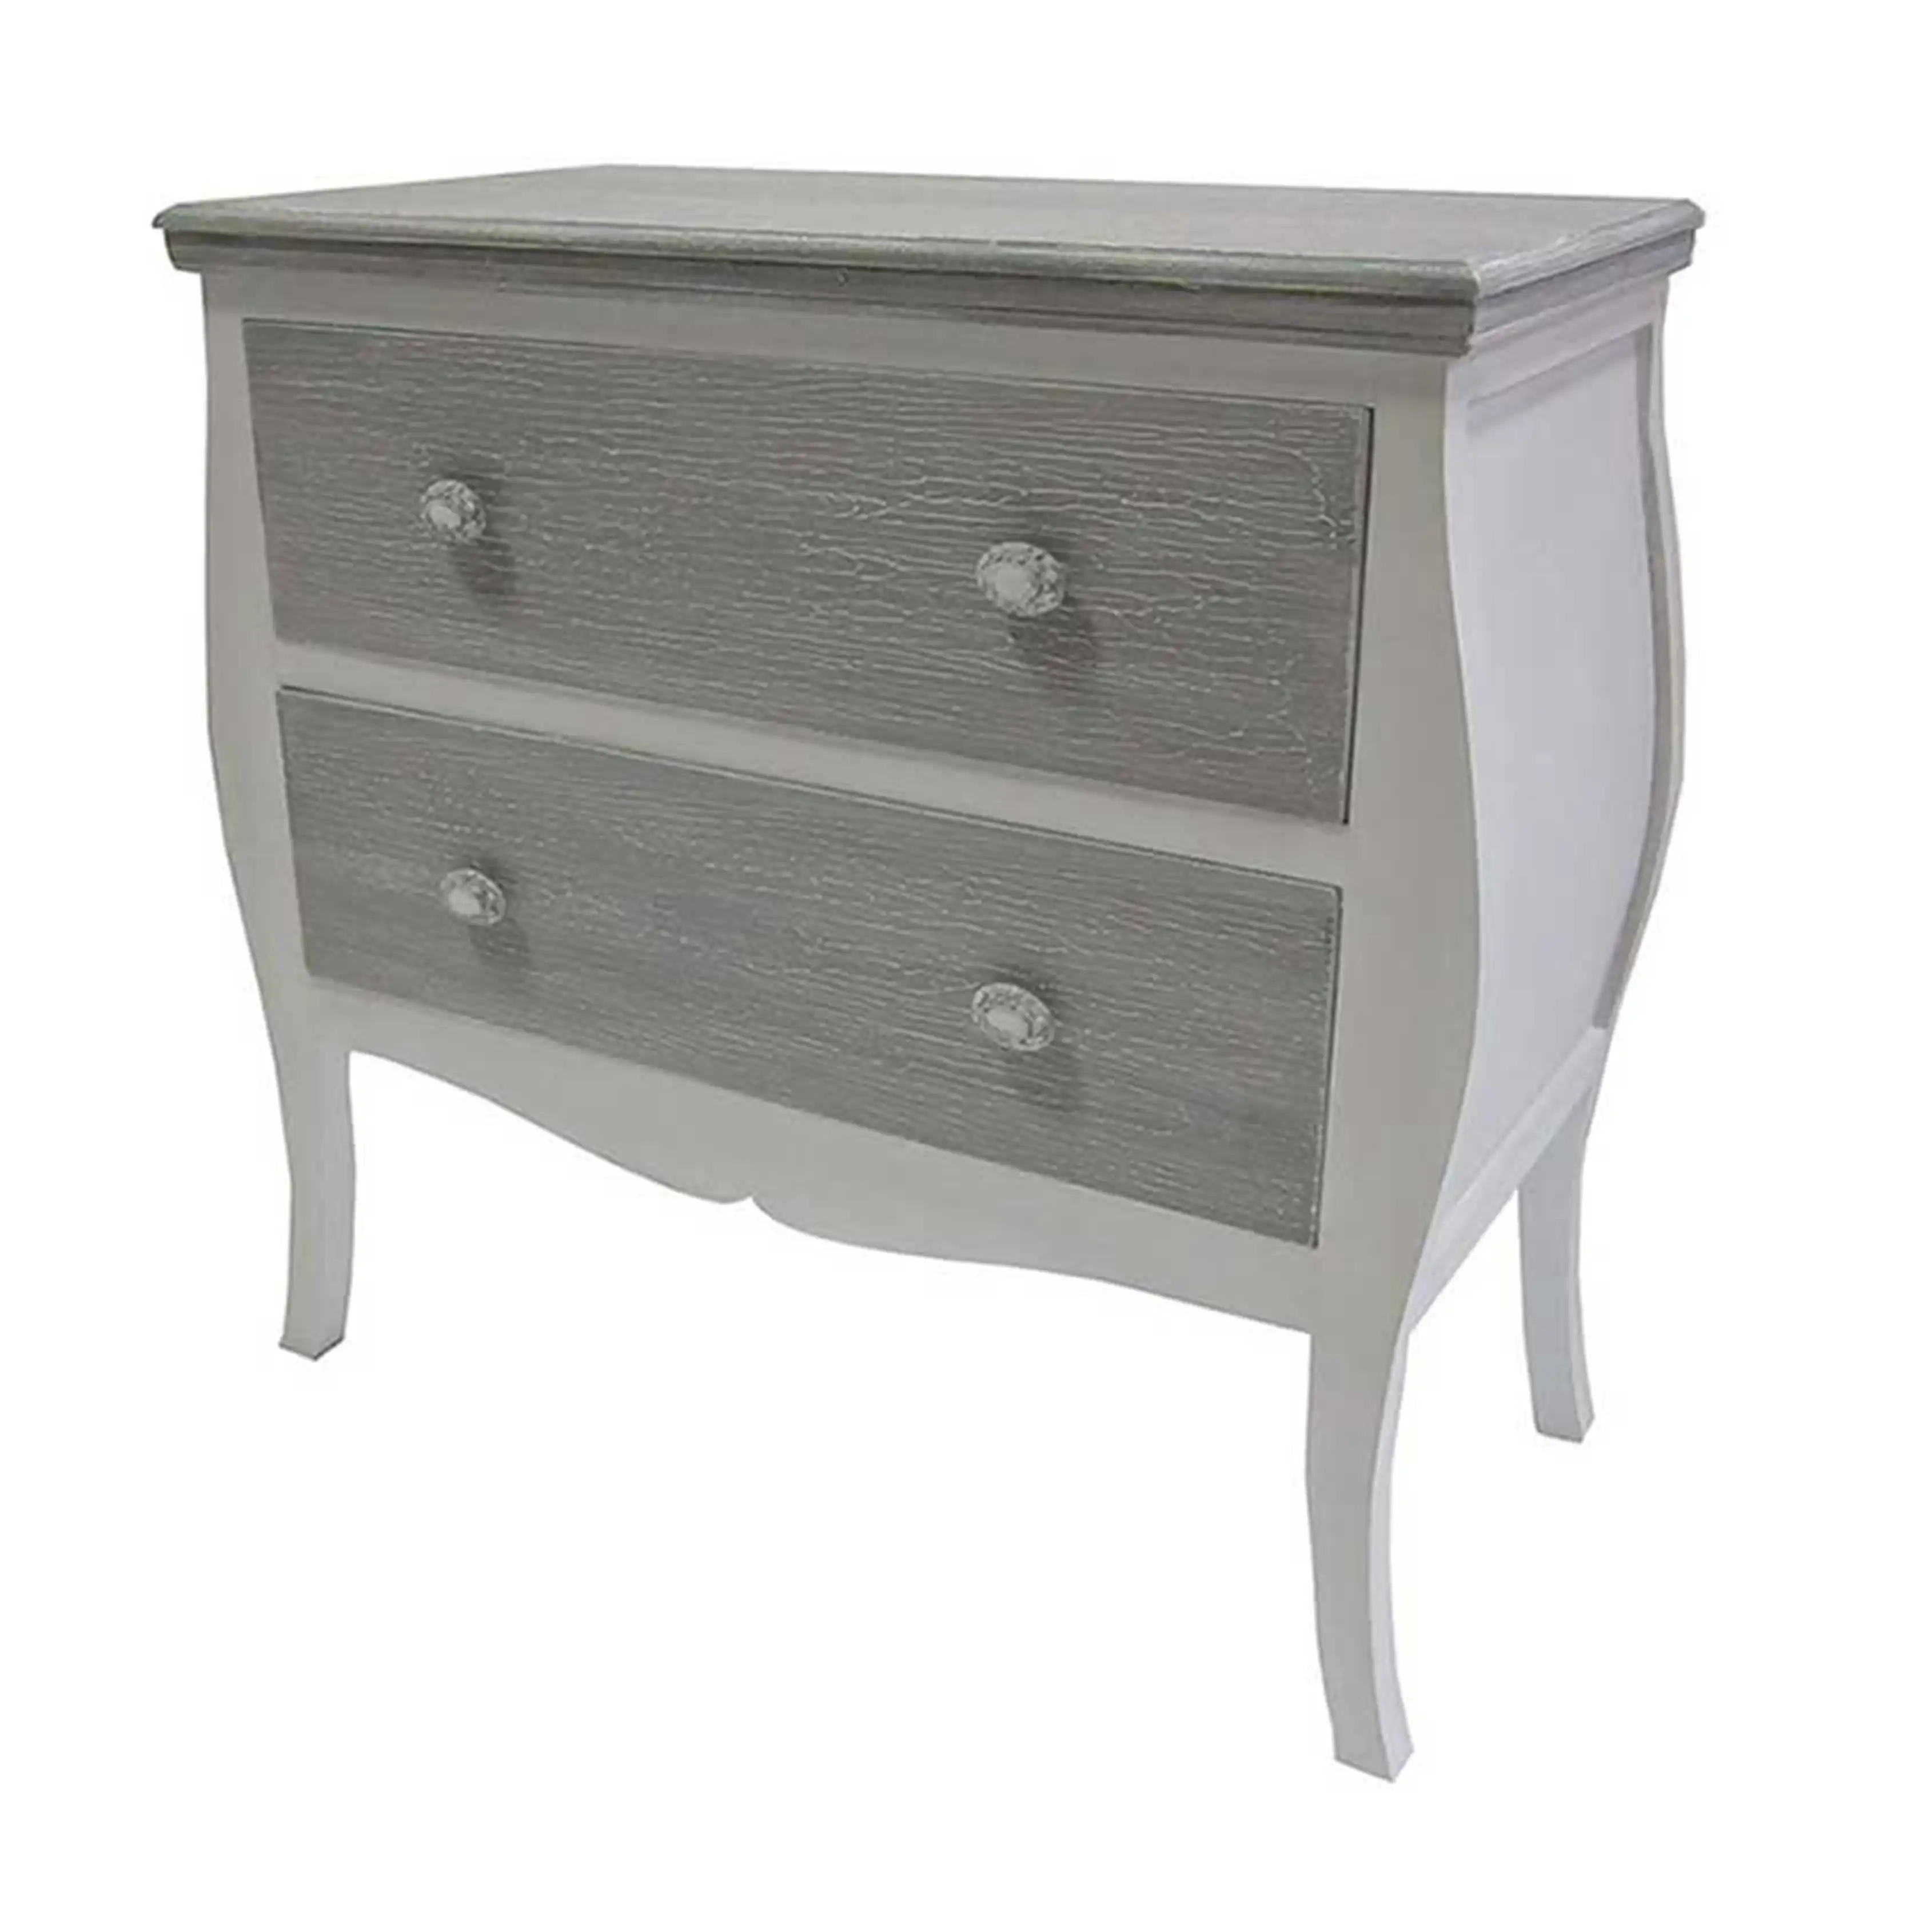 Side board with 2 drawers - popular handicrafts